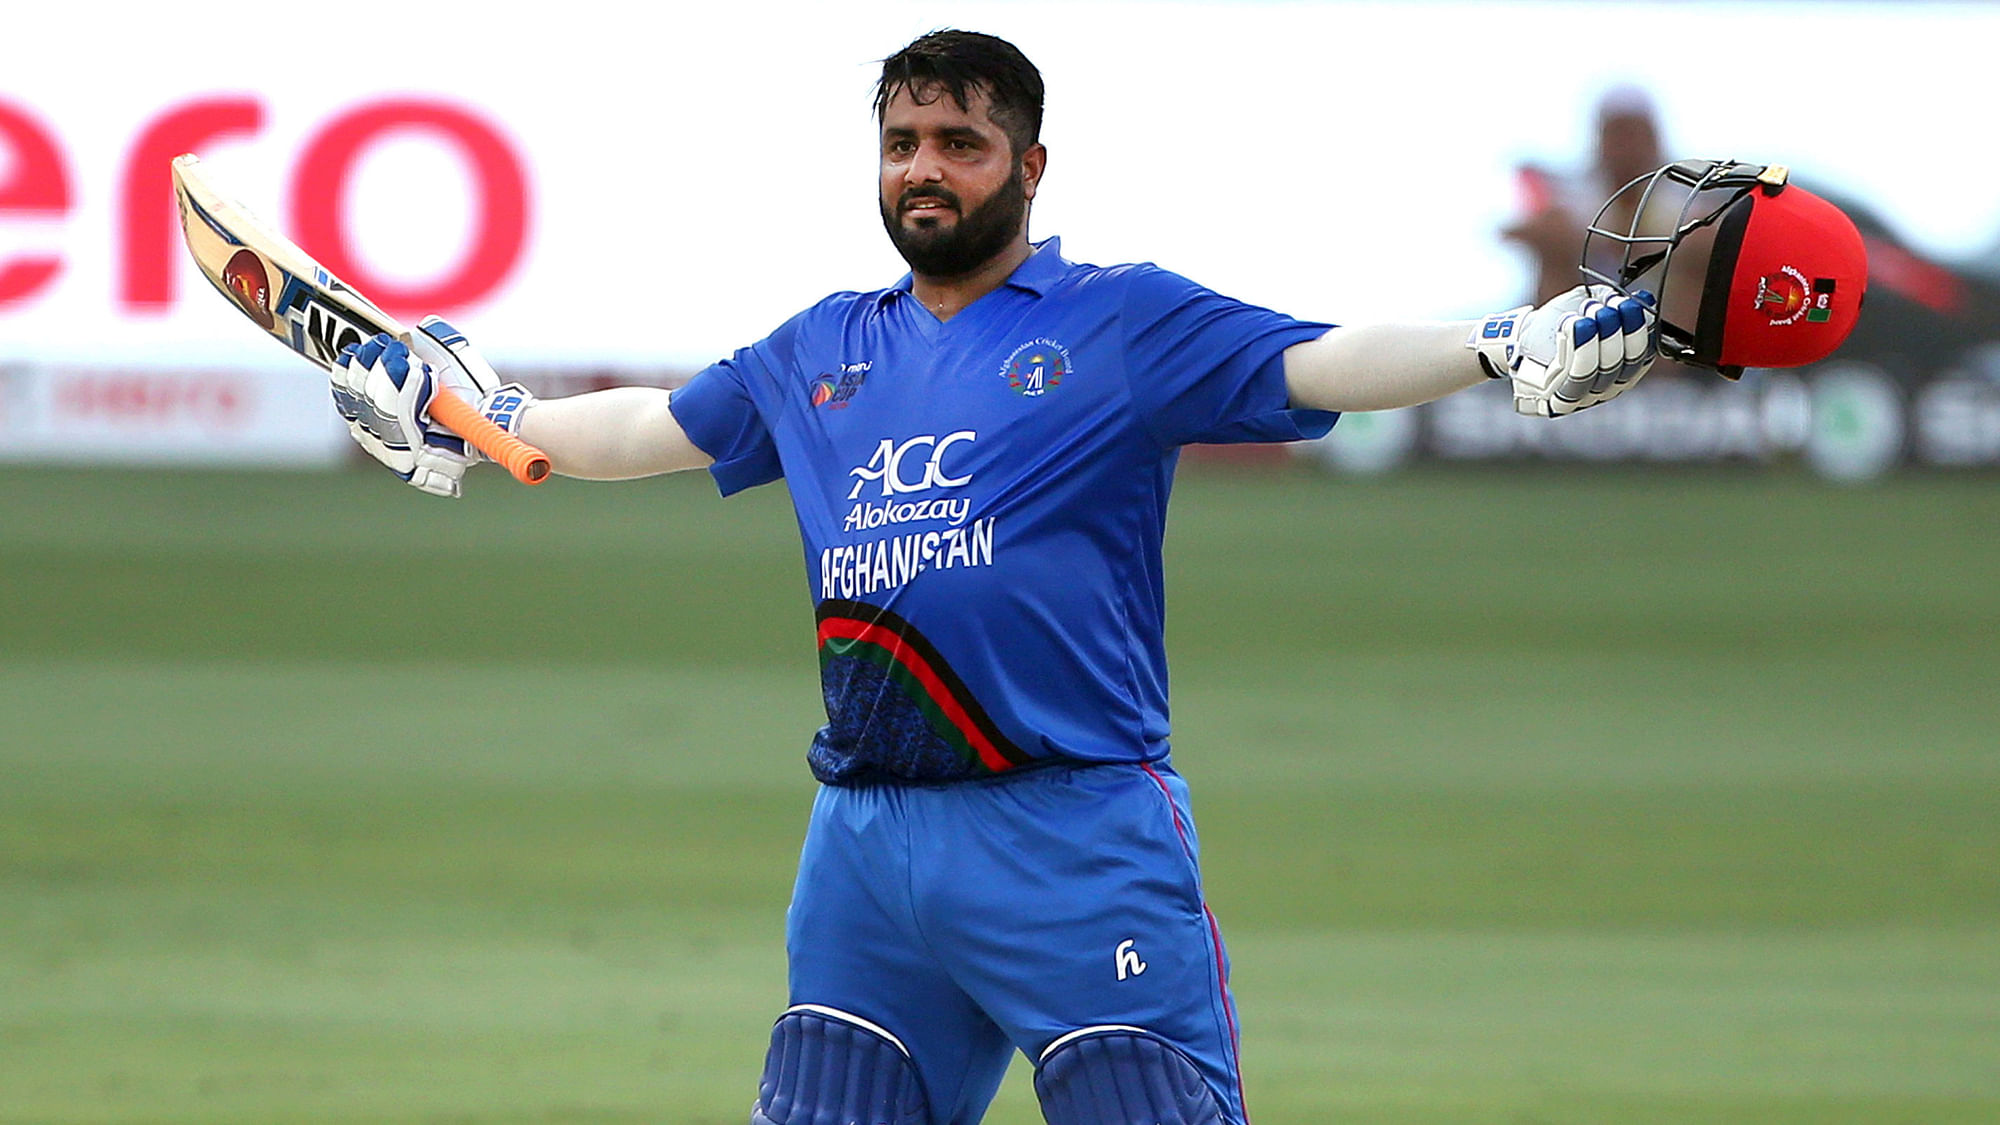 Mohammad Shahzad scored a century against India in the Asia Cup.